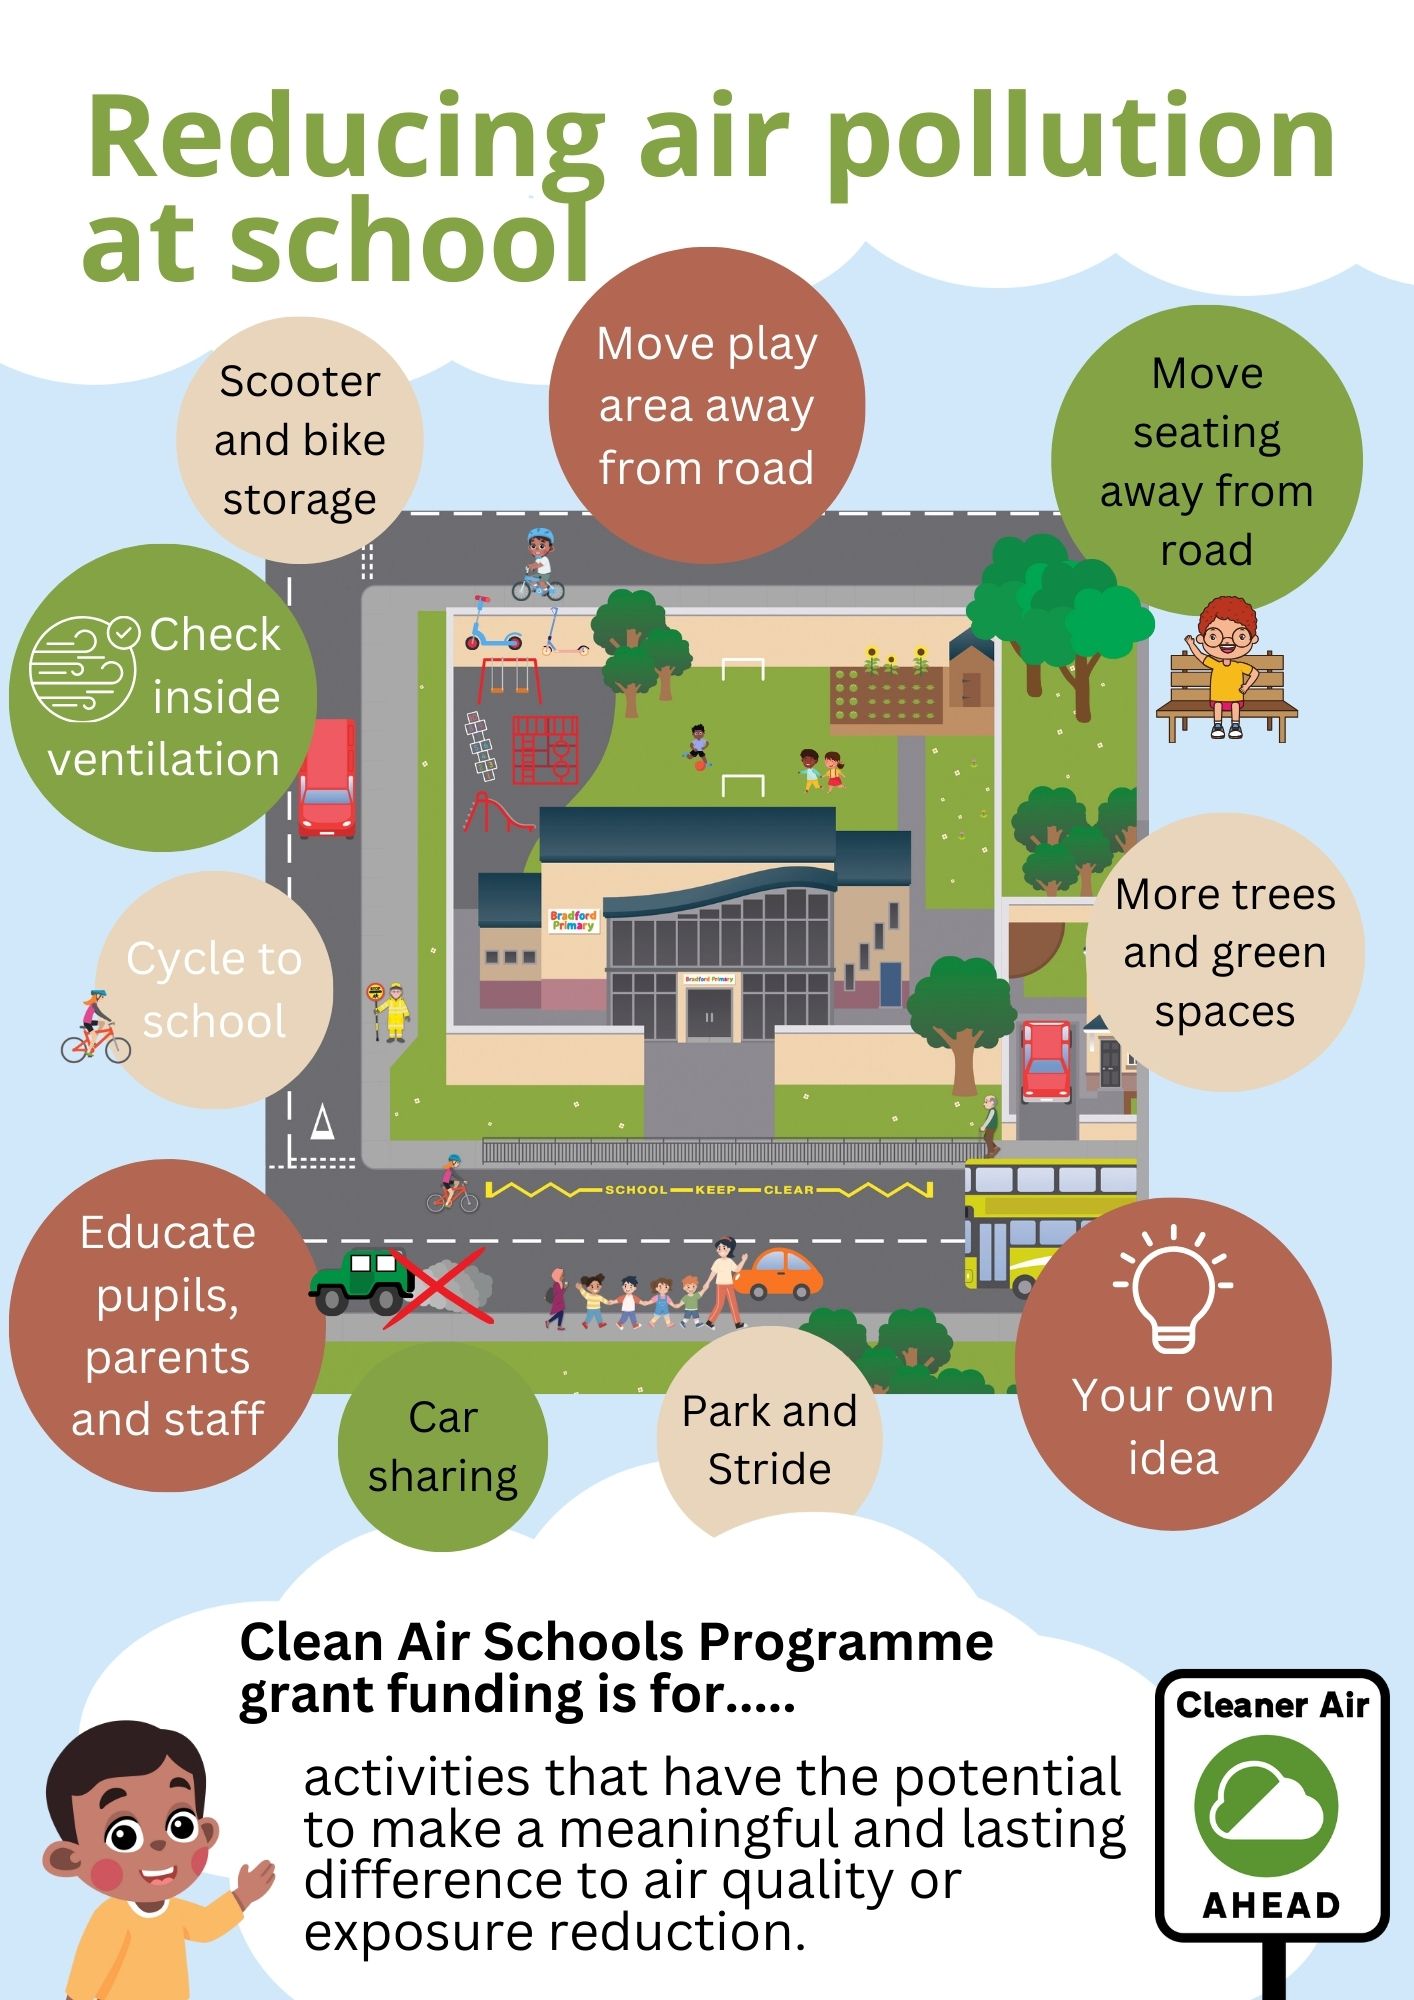 Reducing air pollution at school. An overhead view of a school and immediate surrounding footpaths and roads. The image shows text bubbles of the options available to schools to help reduce air pollution: Move play area away from road, move seating away from road, more trees and green spaces, EV charging, scooter and bike storage, check inside ventilation, cycle to school, educate pupils, parents and staff, car sharing, park and stride, your own ideas. The text at bottom says Clean Air Schools Programme grant funding is for activities that have the potential to make a meaningful and lasting difference to air quality or exposure reduction. With a Cleaner Air Ahead sign in the bottom right corner.